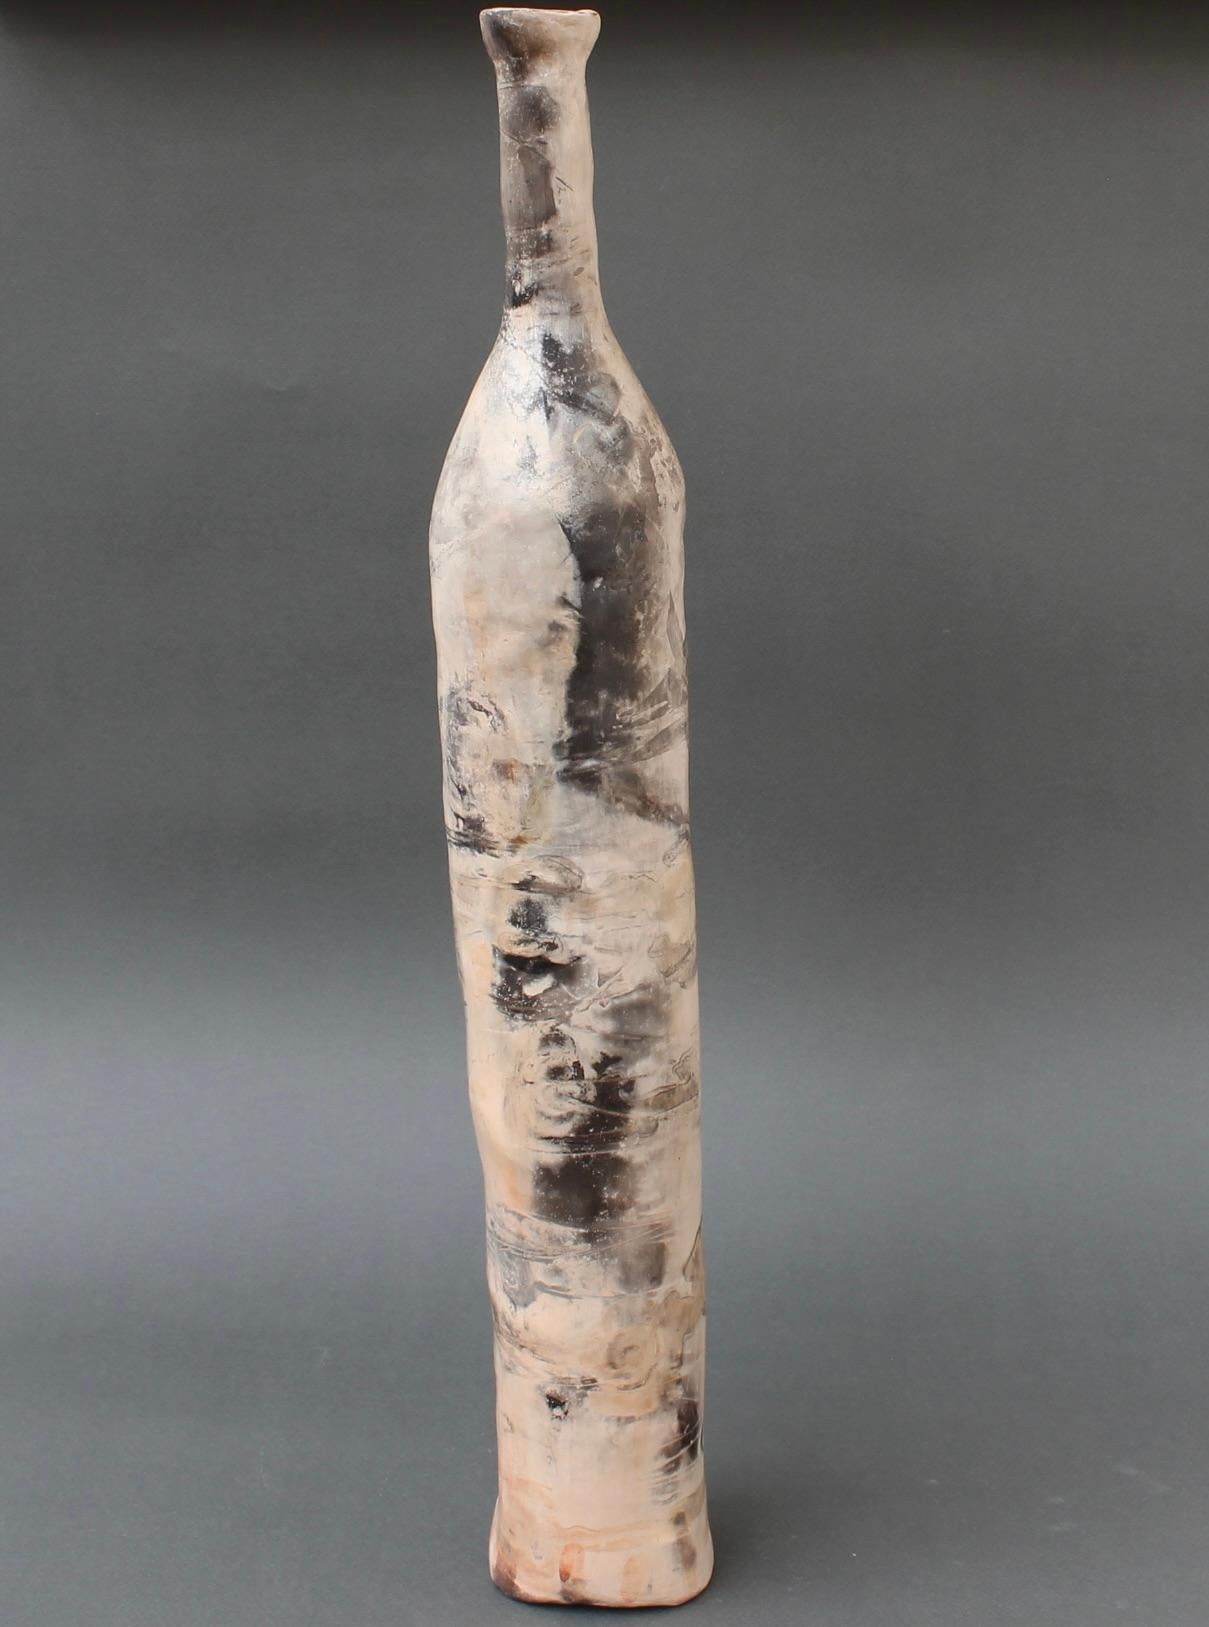 Vintage French decorative ceramic bottle (20th Century). Discovered in the city of Lyon, France, and stunning in every aspect, this extraordinary elongated bottle consists of a misty glaze with a dusty coral colour punctuated with flesh tones and